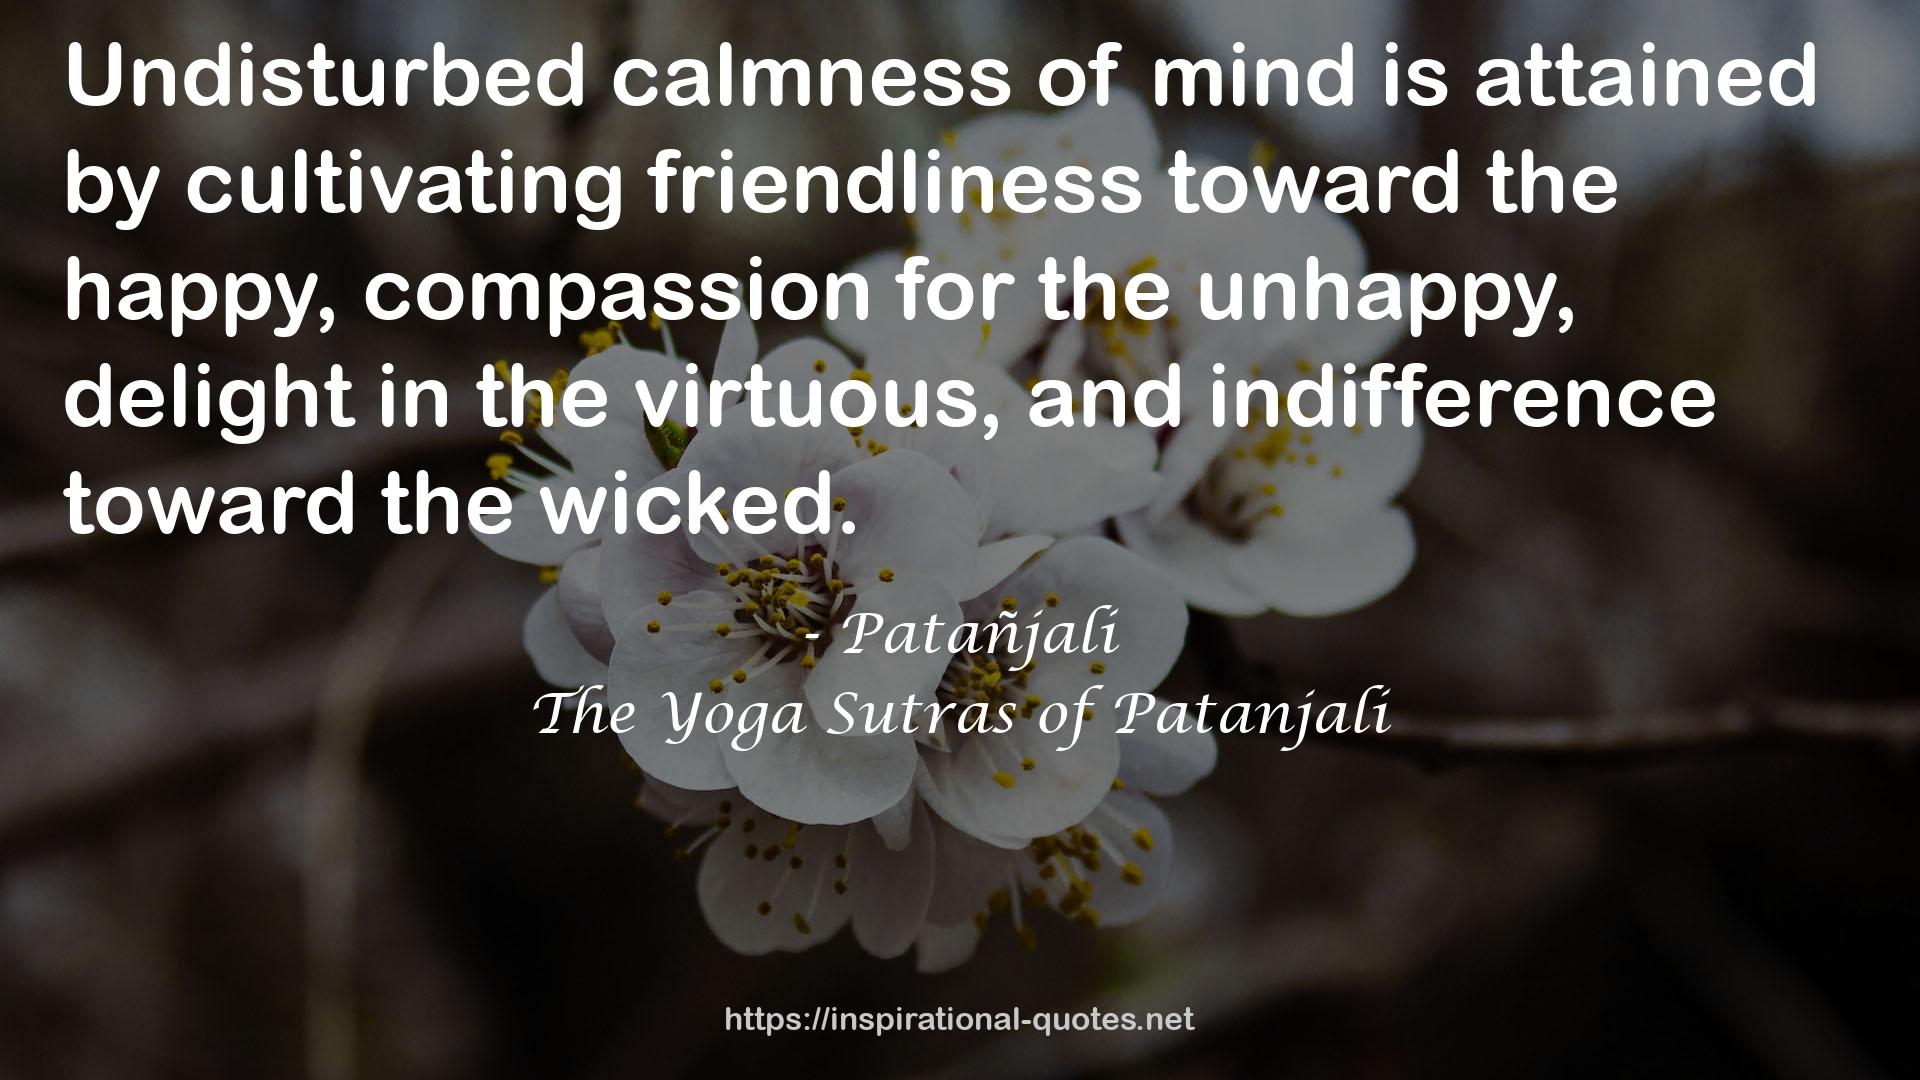 The Yoga Sutras of Patanjali QUOTES